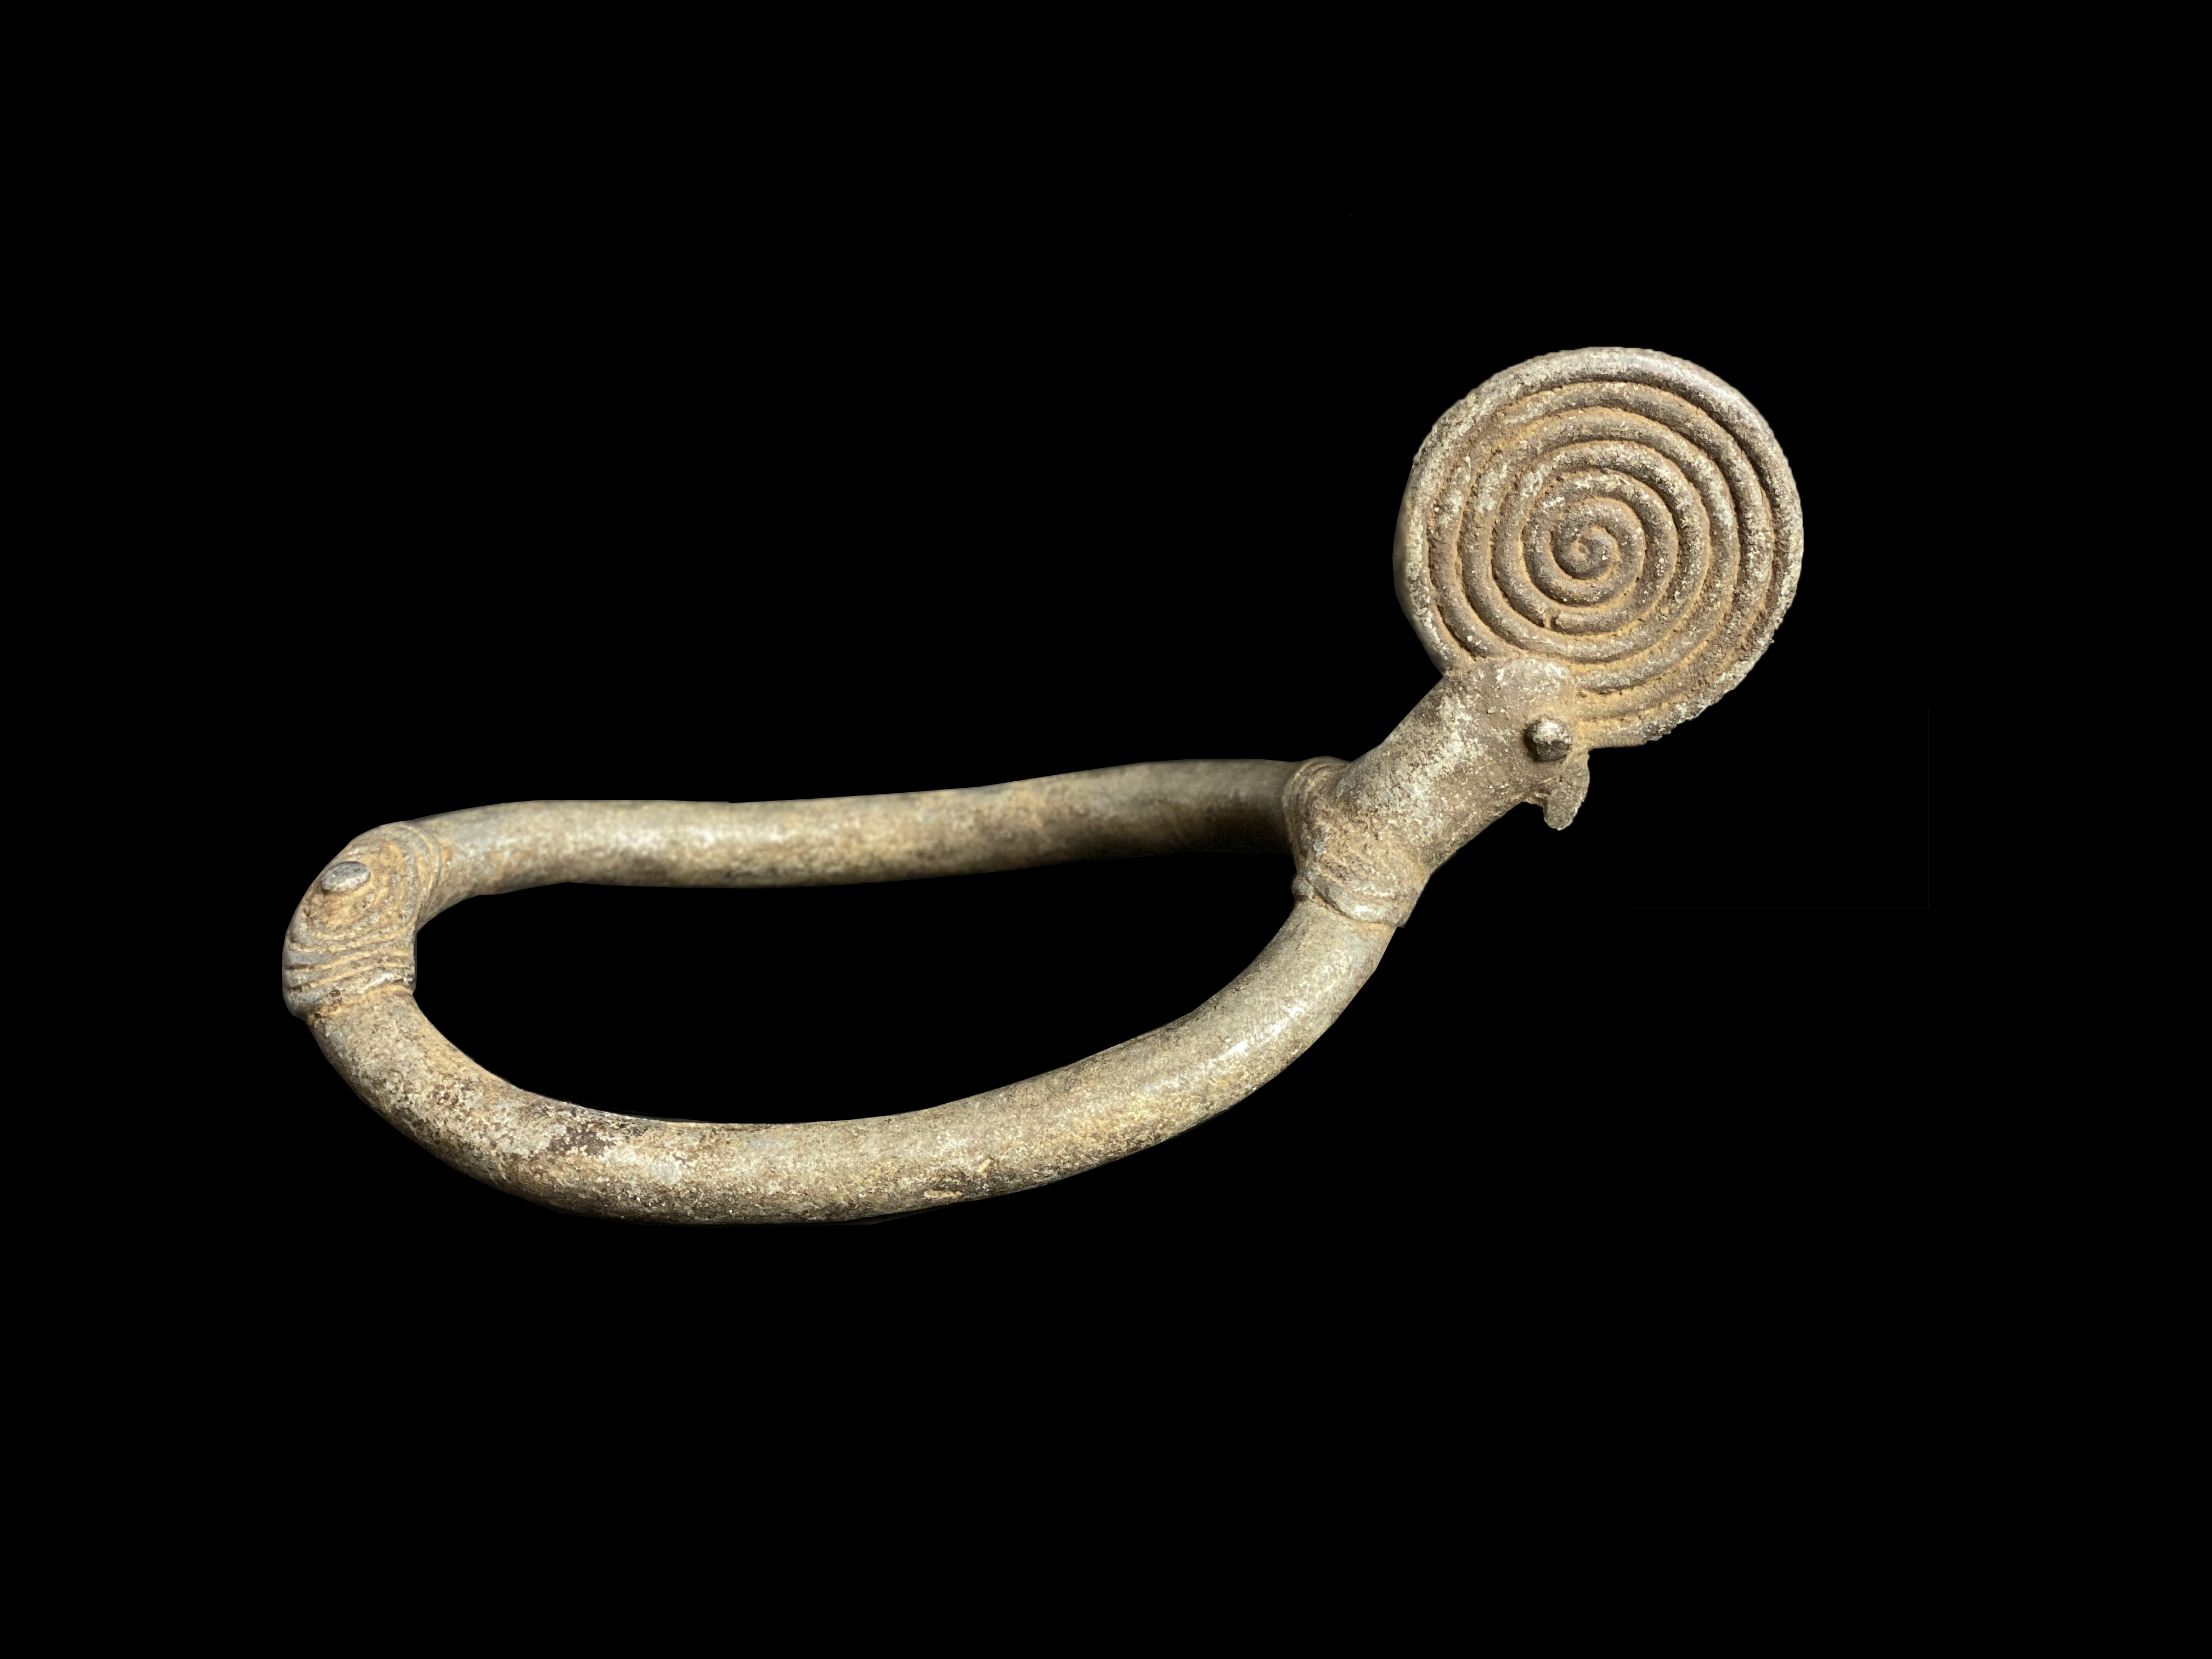 Aluminum Anklet or Chevilliere (a) - Bwa People,Burkina Faso